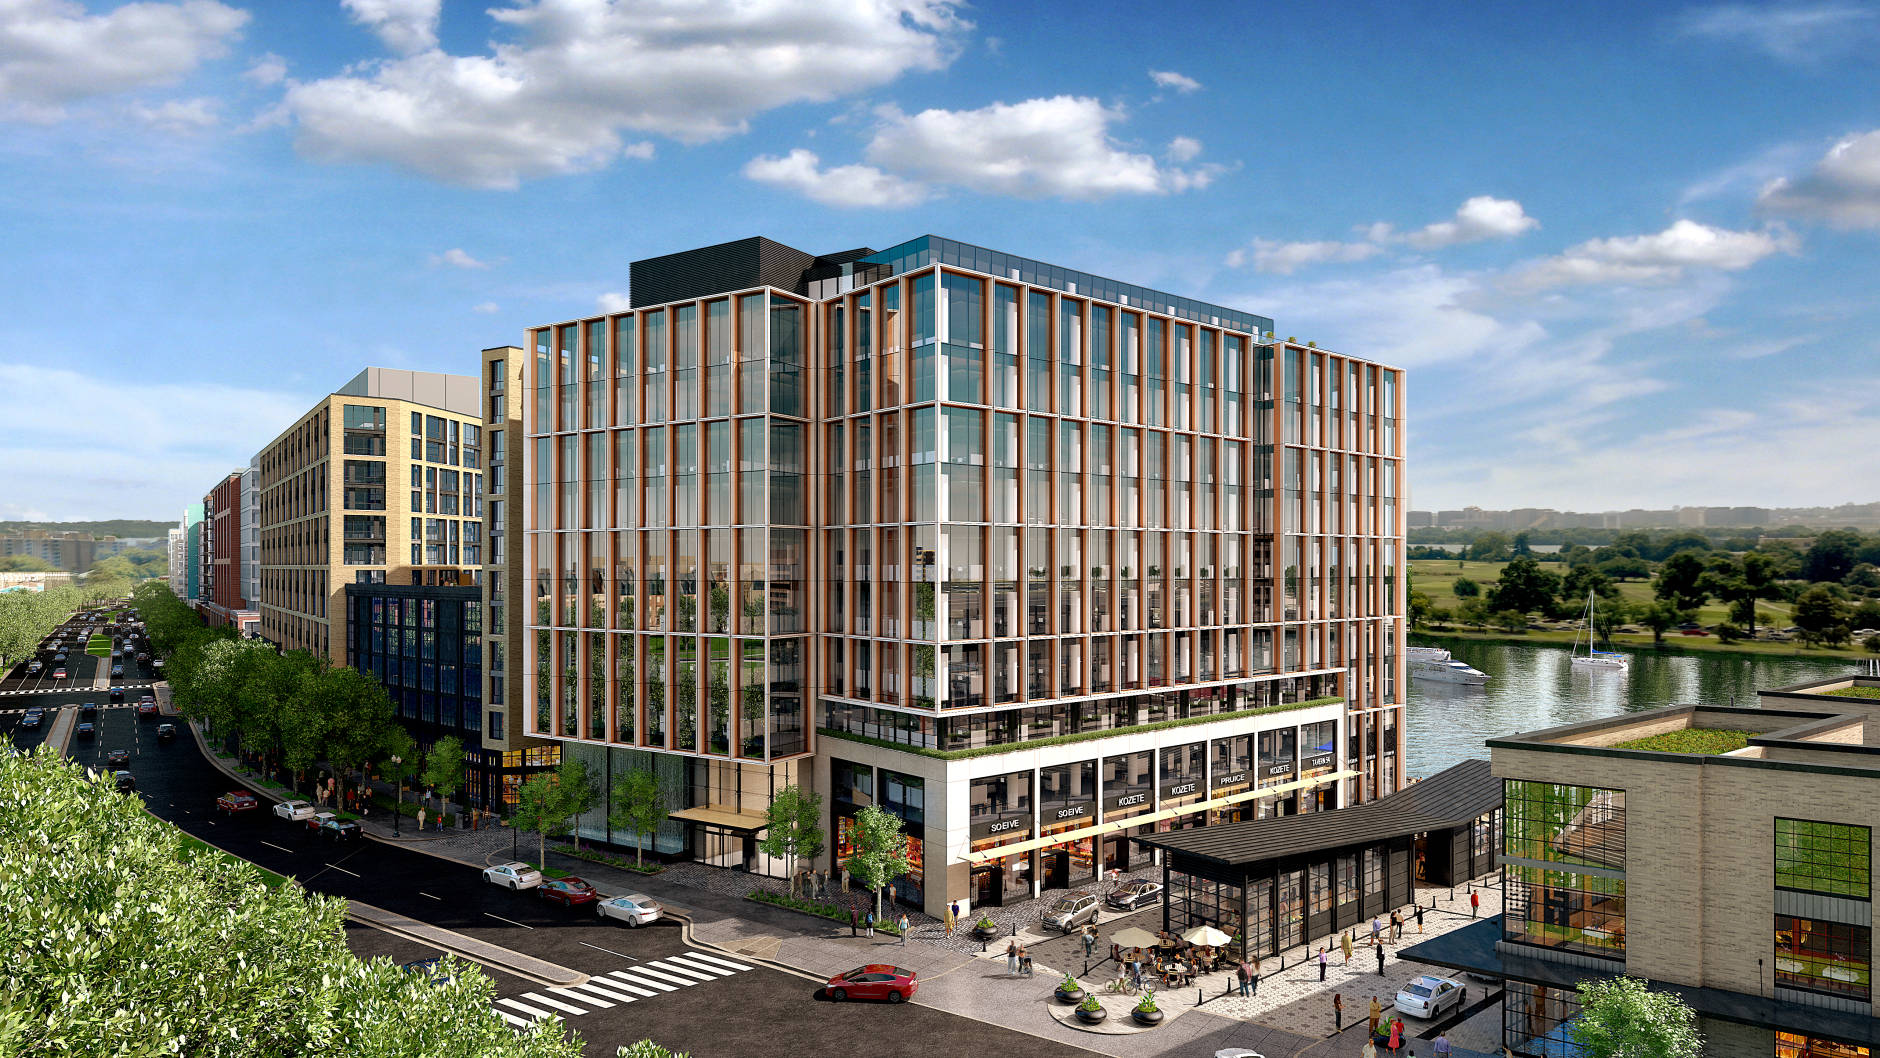 The office building named "1000 Maine" depicted in this artist's rendering will have panoramic views of the nation's capital. (Courtesy The Wharf)